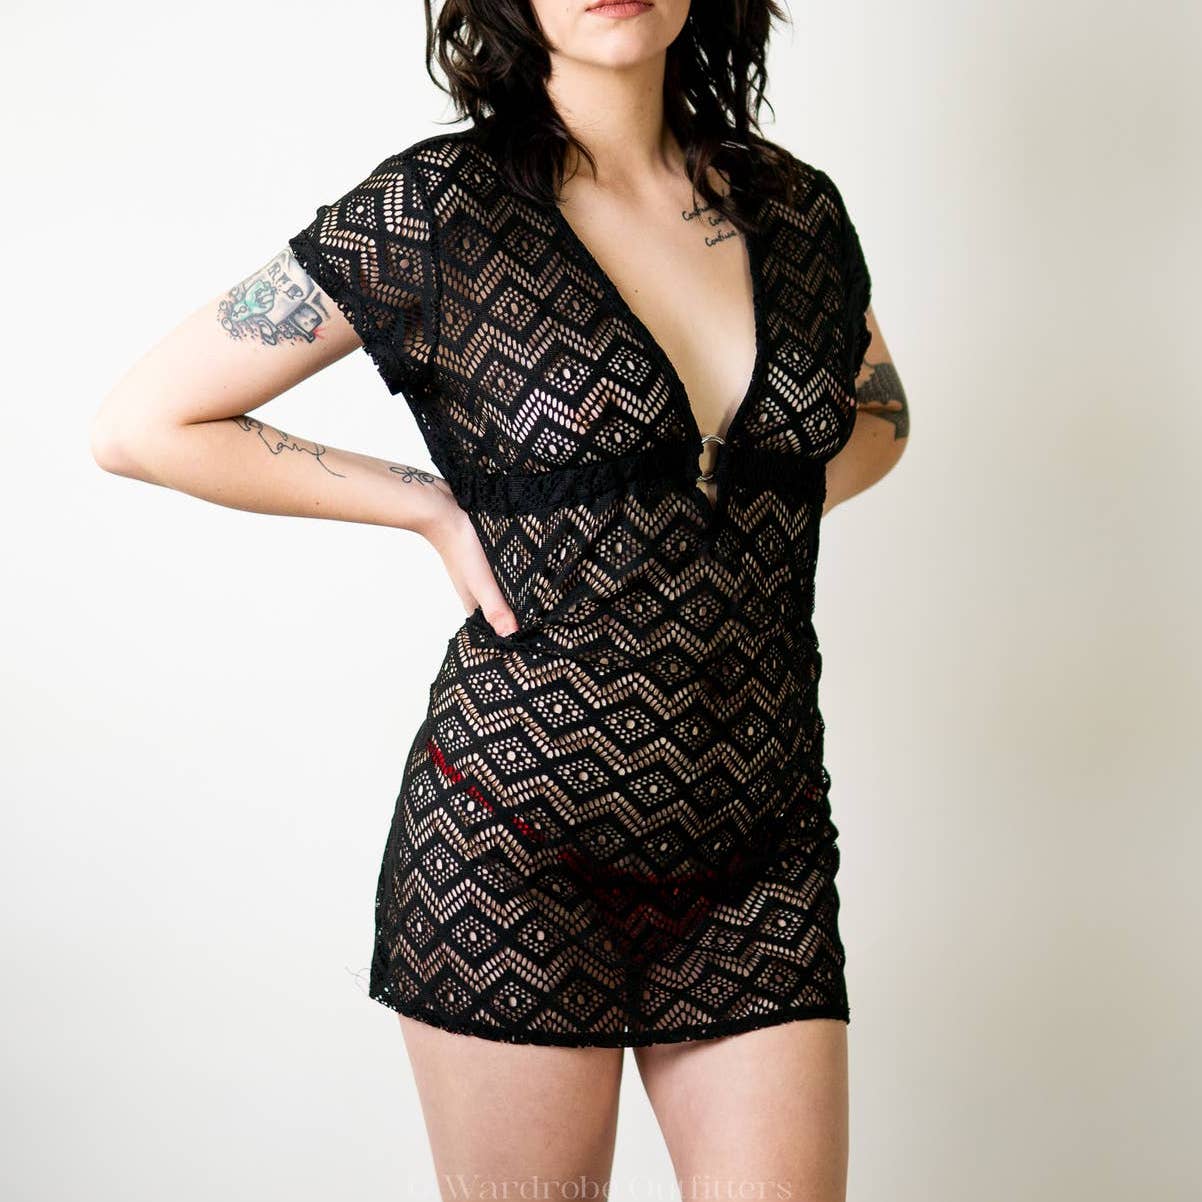 Catalina Black Mesh Lace Swimsuit Cover Up Dress